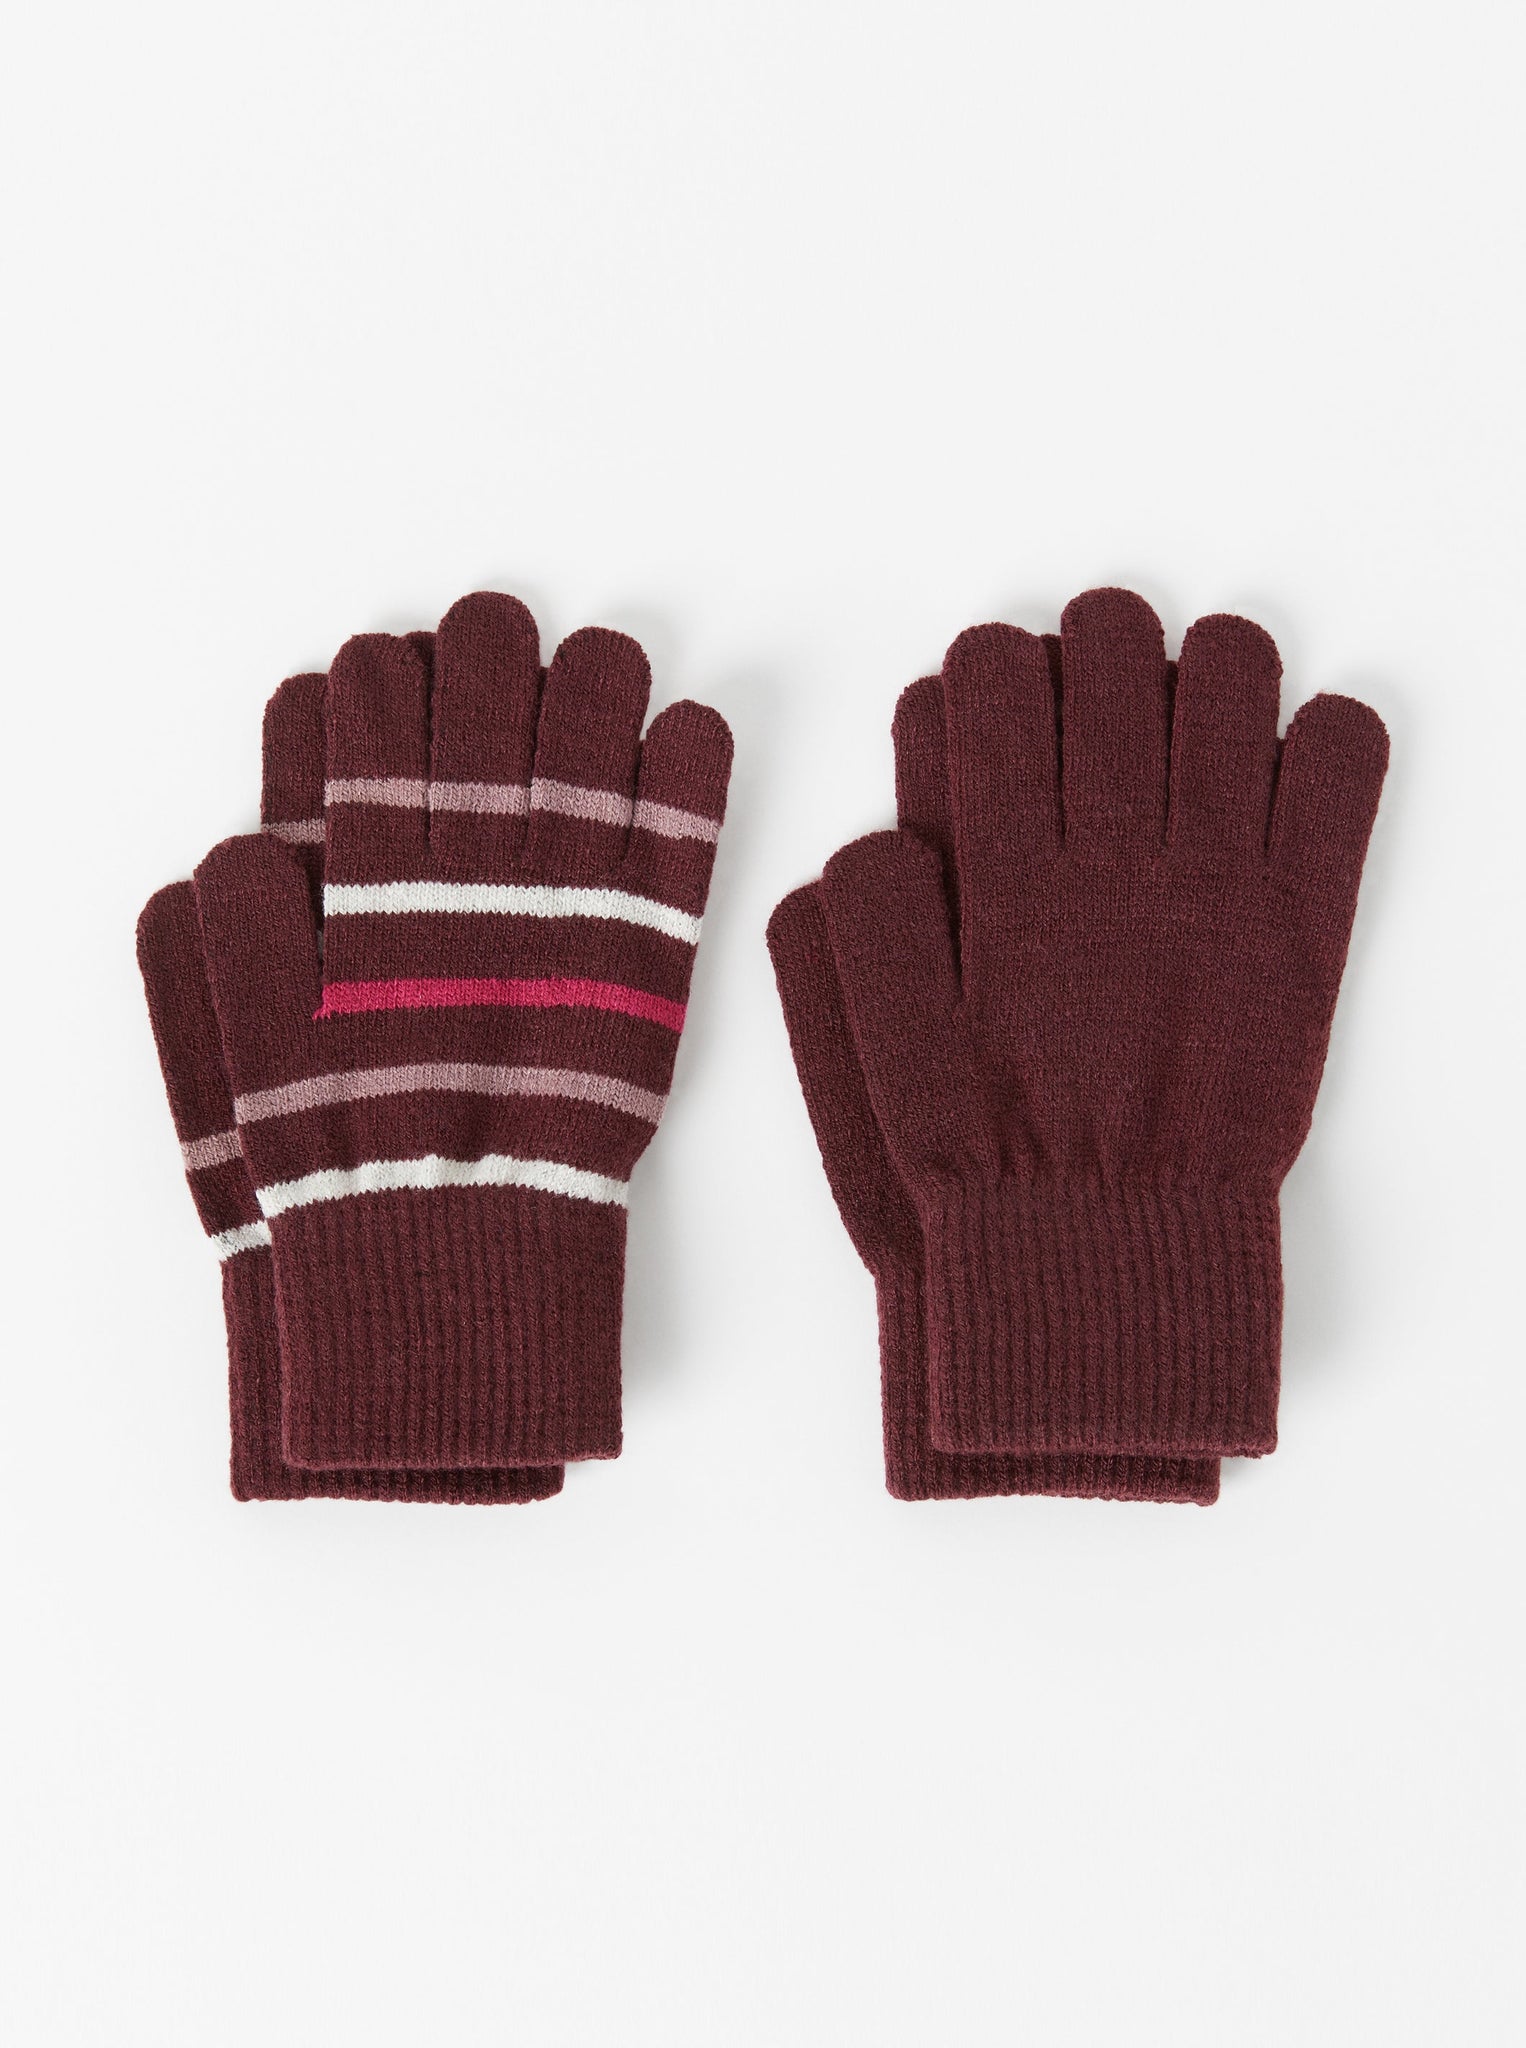 Burgundy Magic Kids Gloves Multipack from the Polarn O. Pyret kidswear collection. Made from sustainable sources.